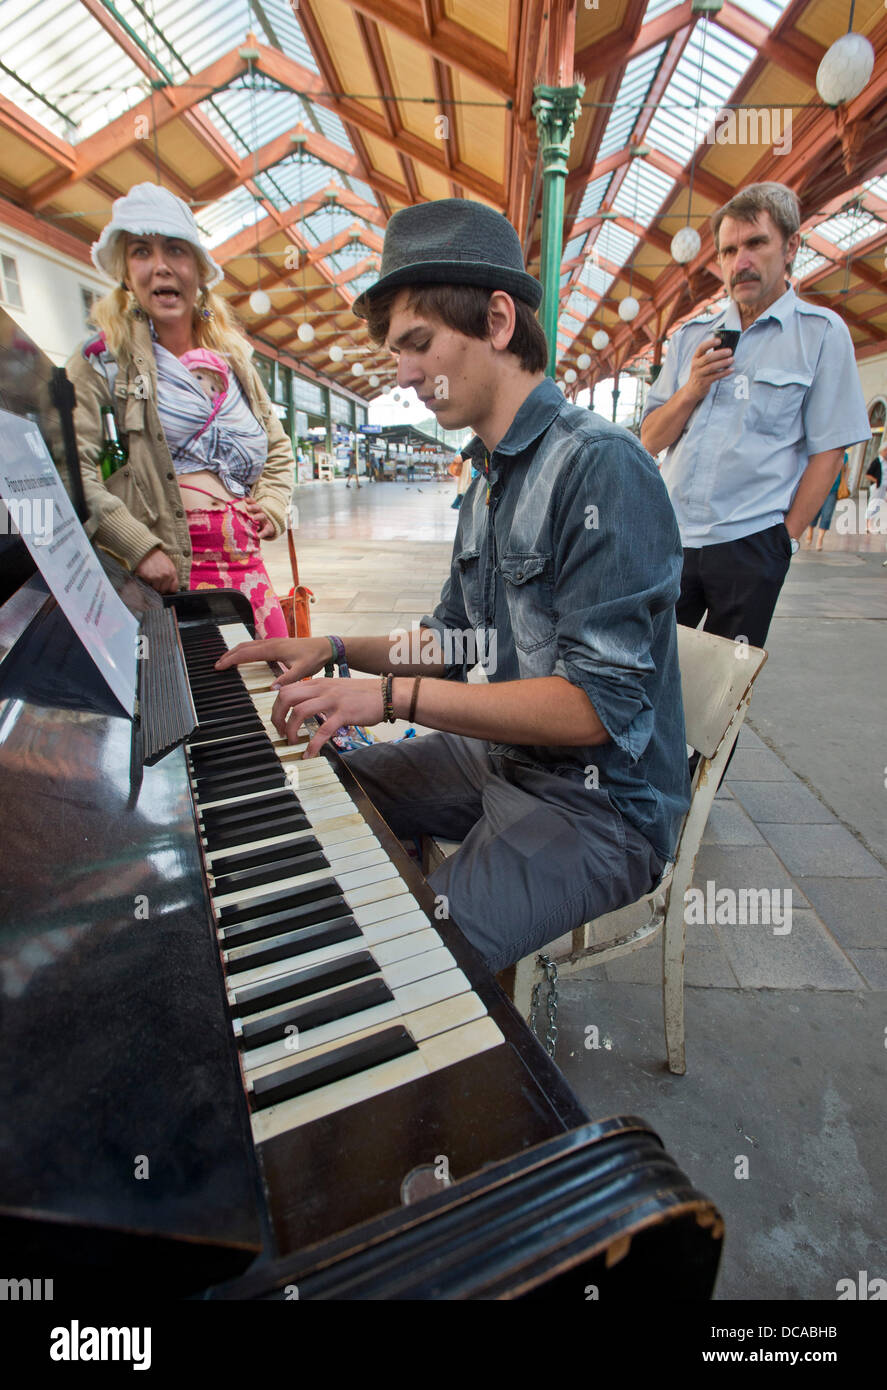 Prague, Czech Republic. 13th August 2013. People play public accessed piano at Prague's Masaryk railway station, Czech Republic as coffee owner Ondrej Kobza placed pianos on several places in Prague where people can play these music instruments freely. Kobza wants to make the public area more cosy. (CTK Photo/Vit Simanek/Alamy Live News) Stock Photo